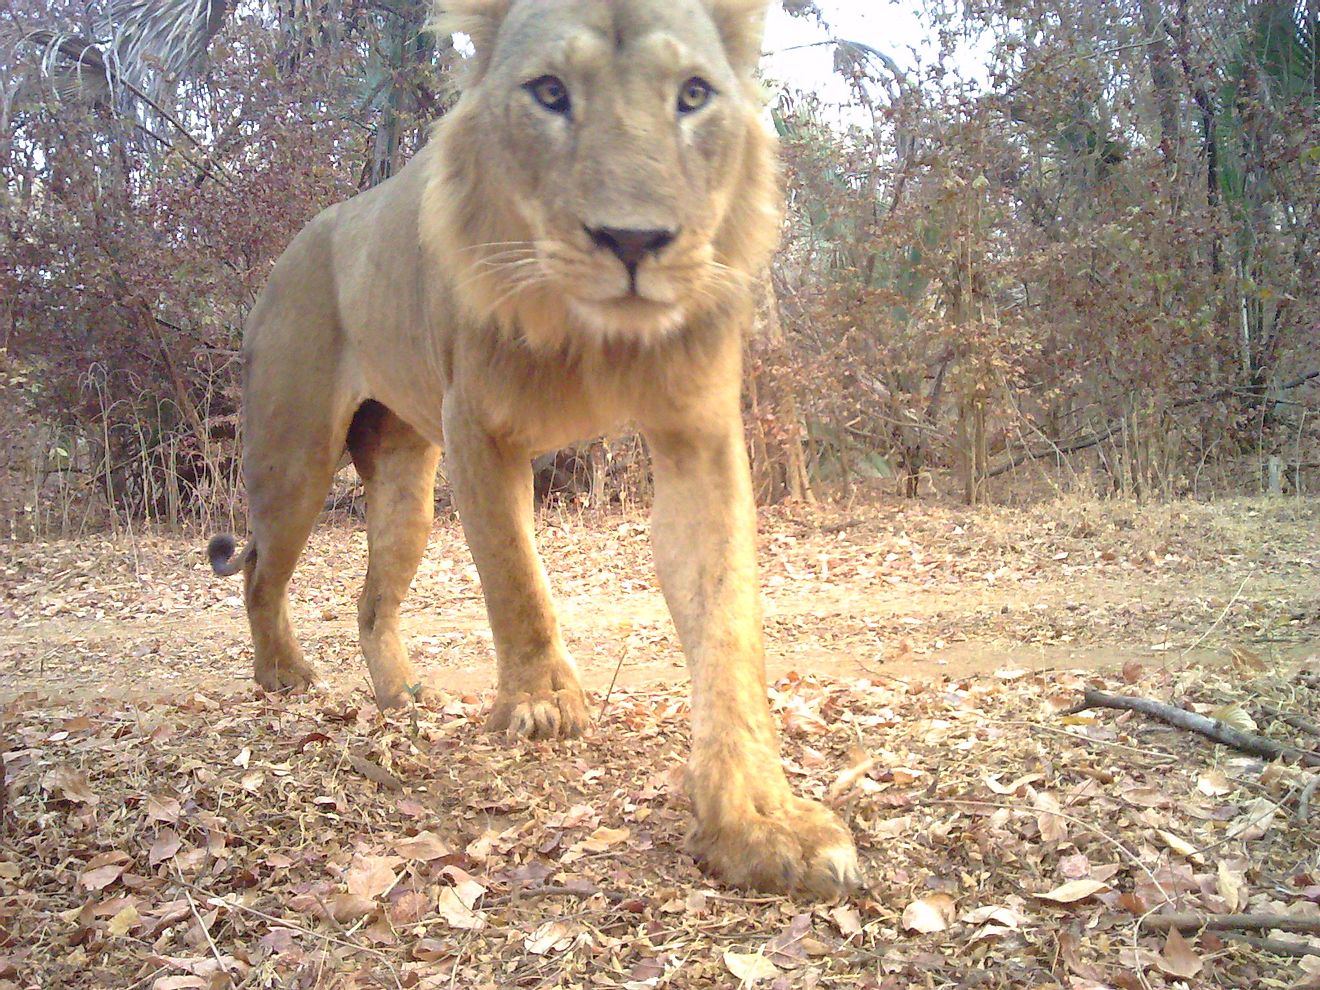 A camera trap picture of a male lion in Niokolo Koba National Park. Image credit Panthera/DPN